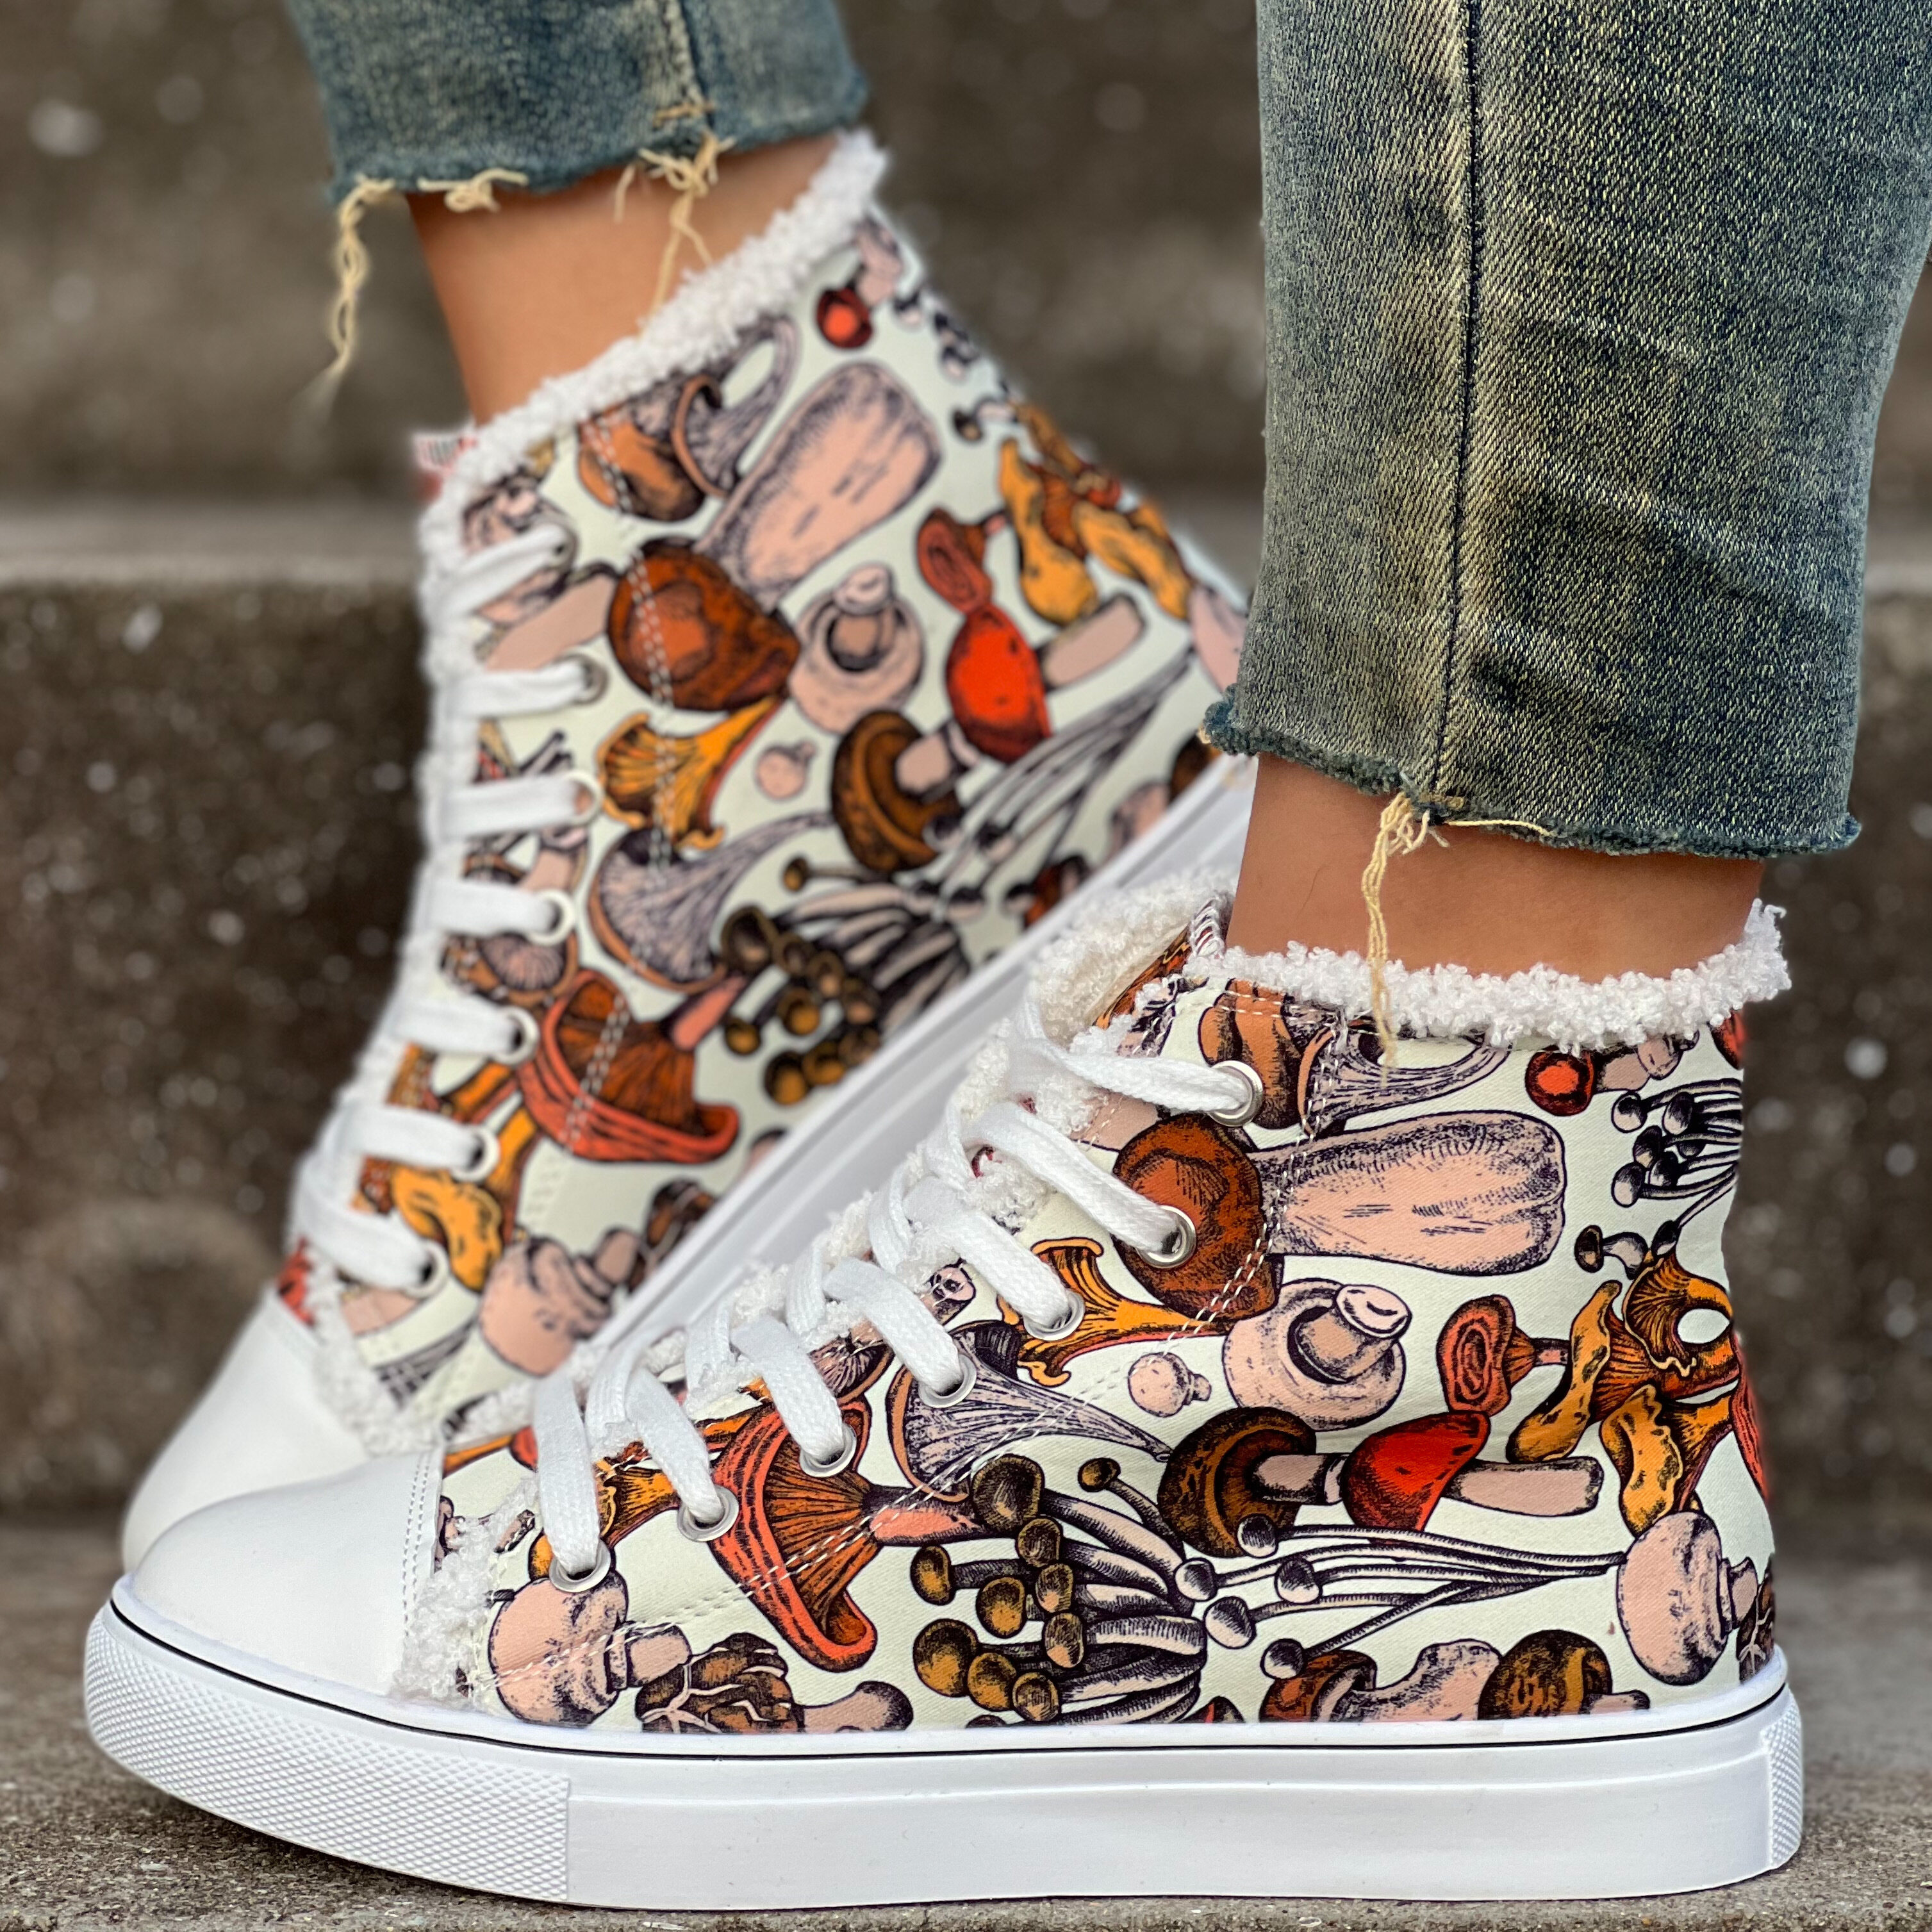 Women's Mushroom Print Canvas Shoes, Casual Lace Up High Top Sneakers,  Comfortable Outdoor Shoes